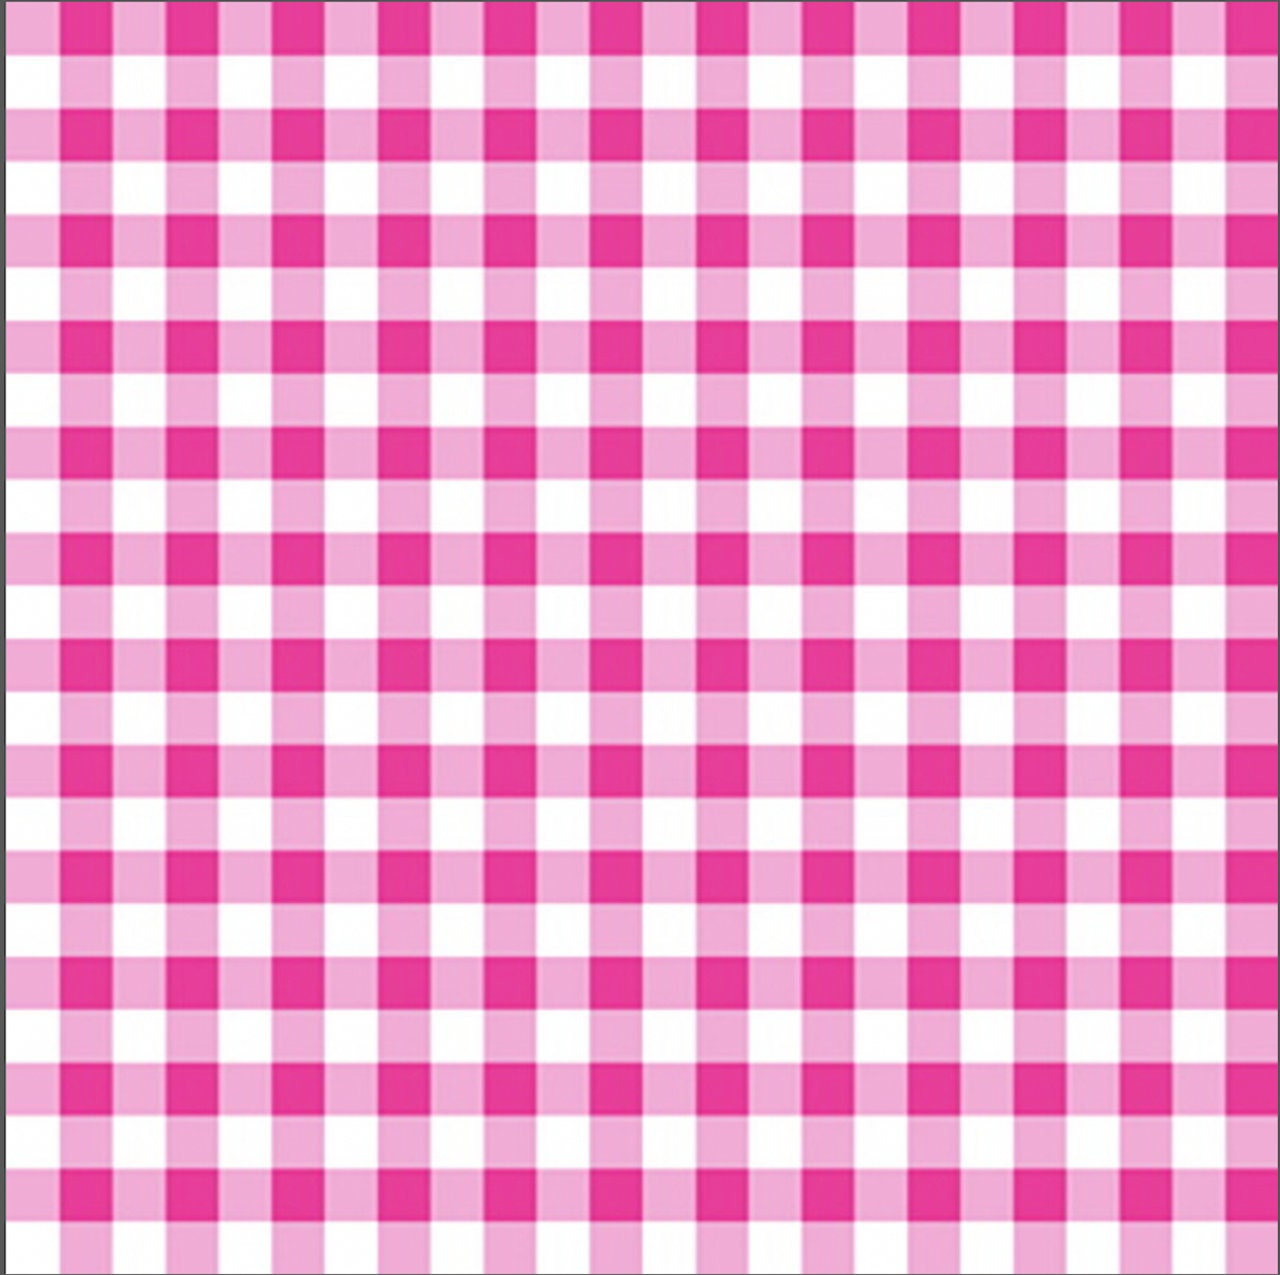 Once Upon a Time Pink & White Gingham print by Delphine Cubitt for Henry Glass continuous cuts of Quilter's Cotton